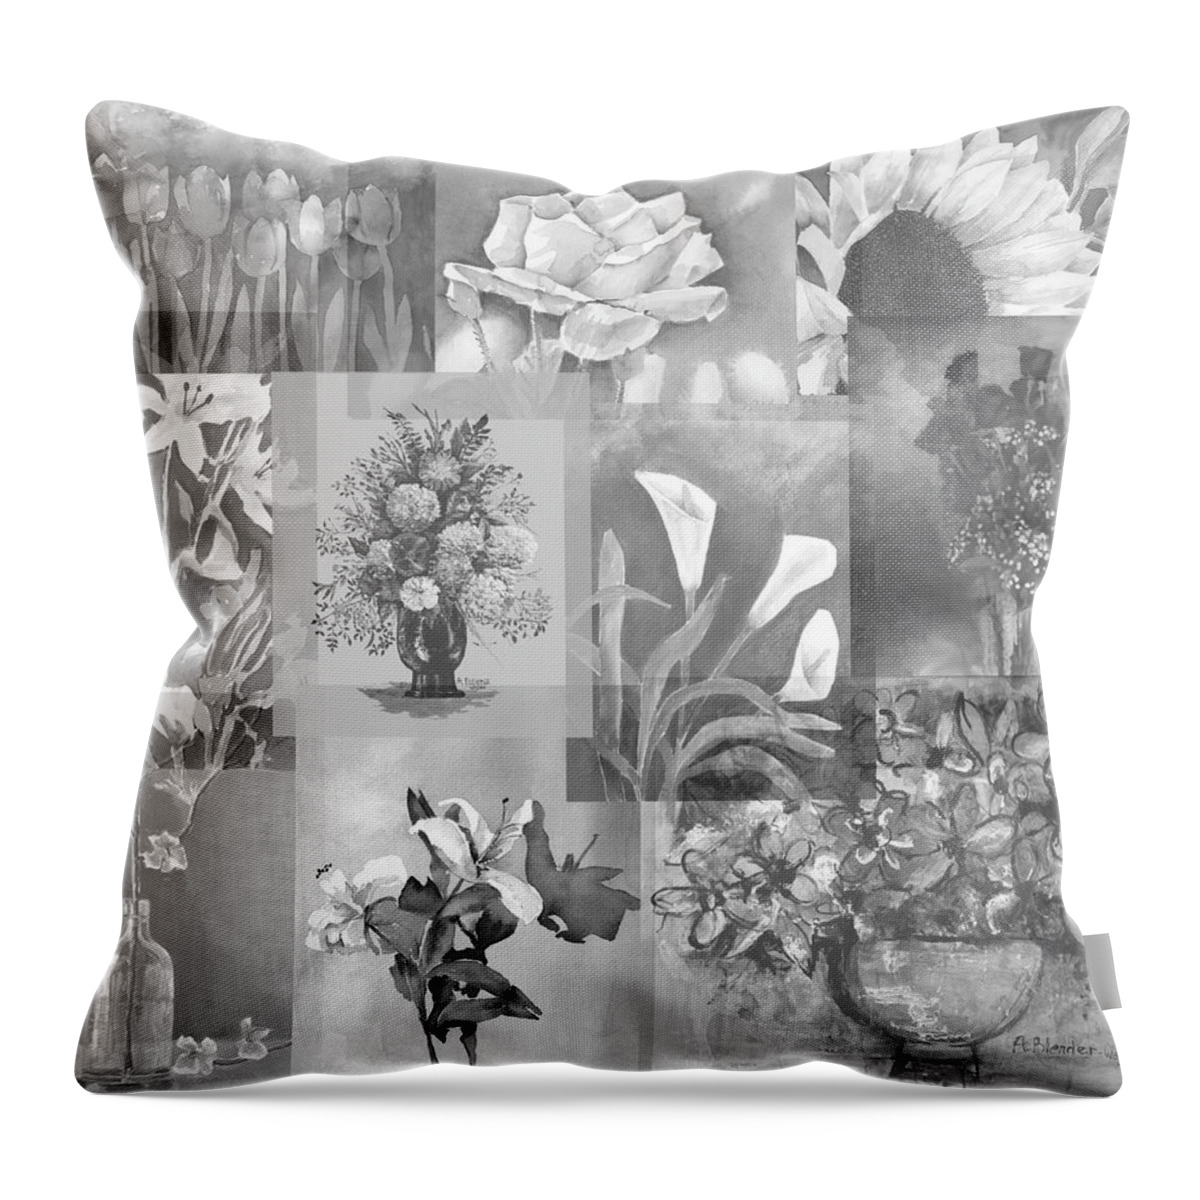 Flower Throw Pillow featuring the mixed media Flower Montage In Shades Of Gray by Arline Wagner